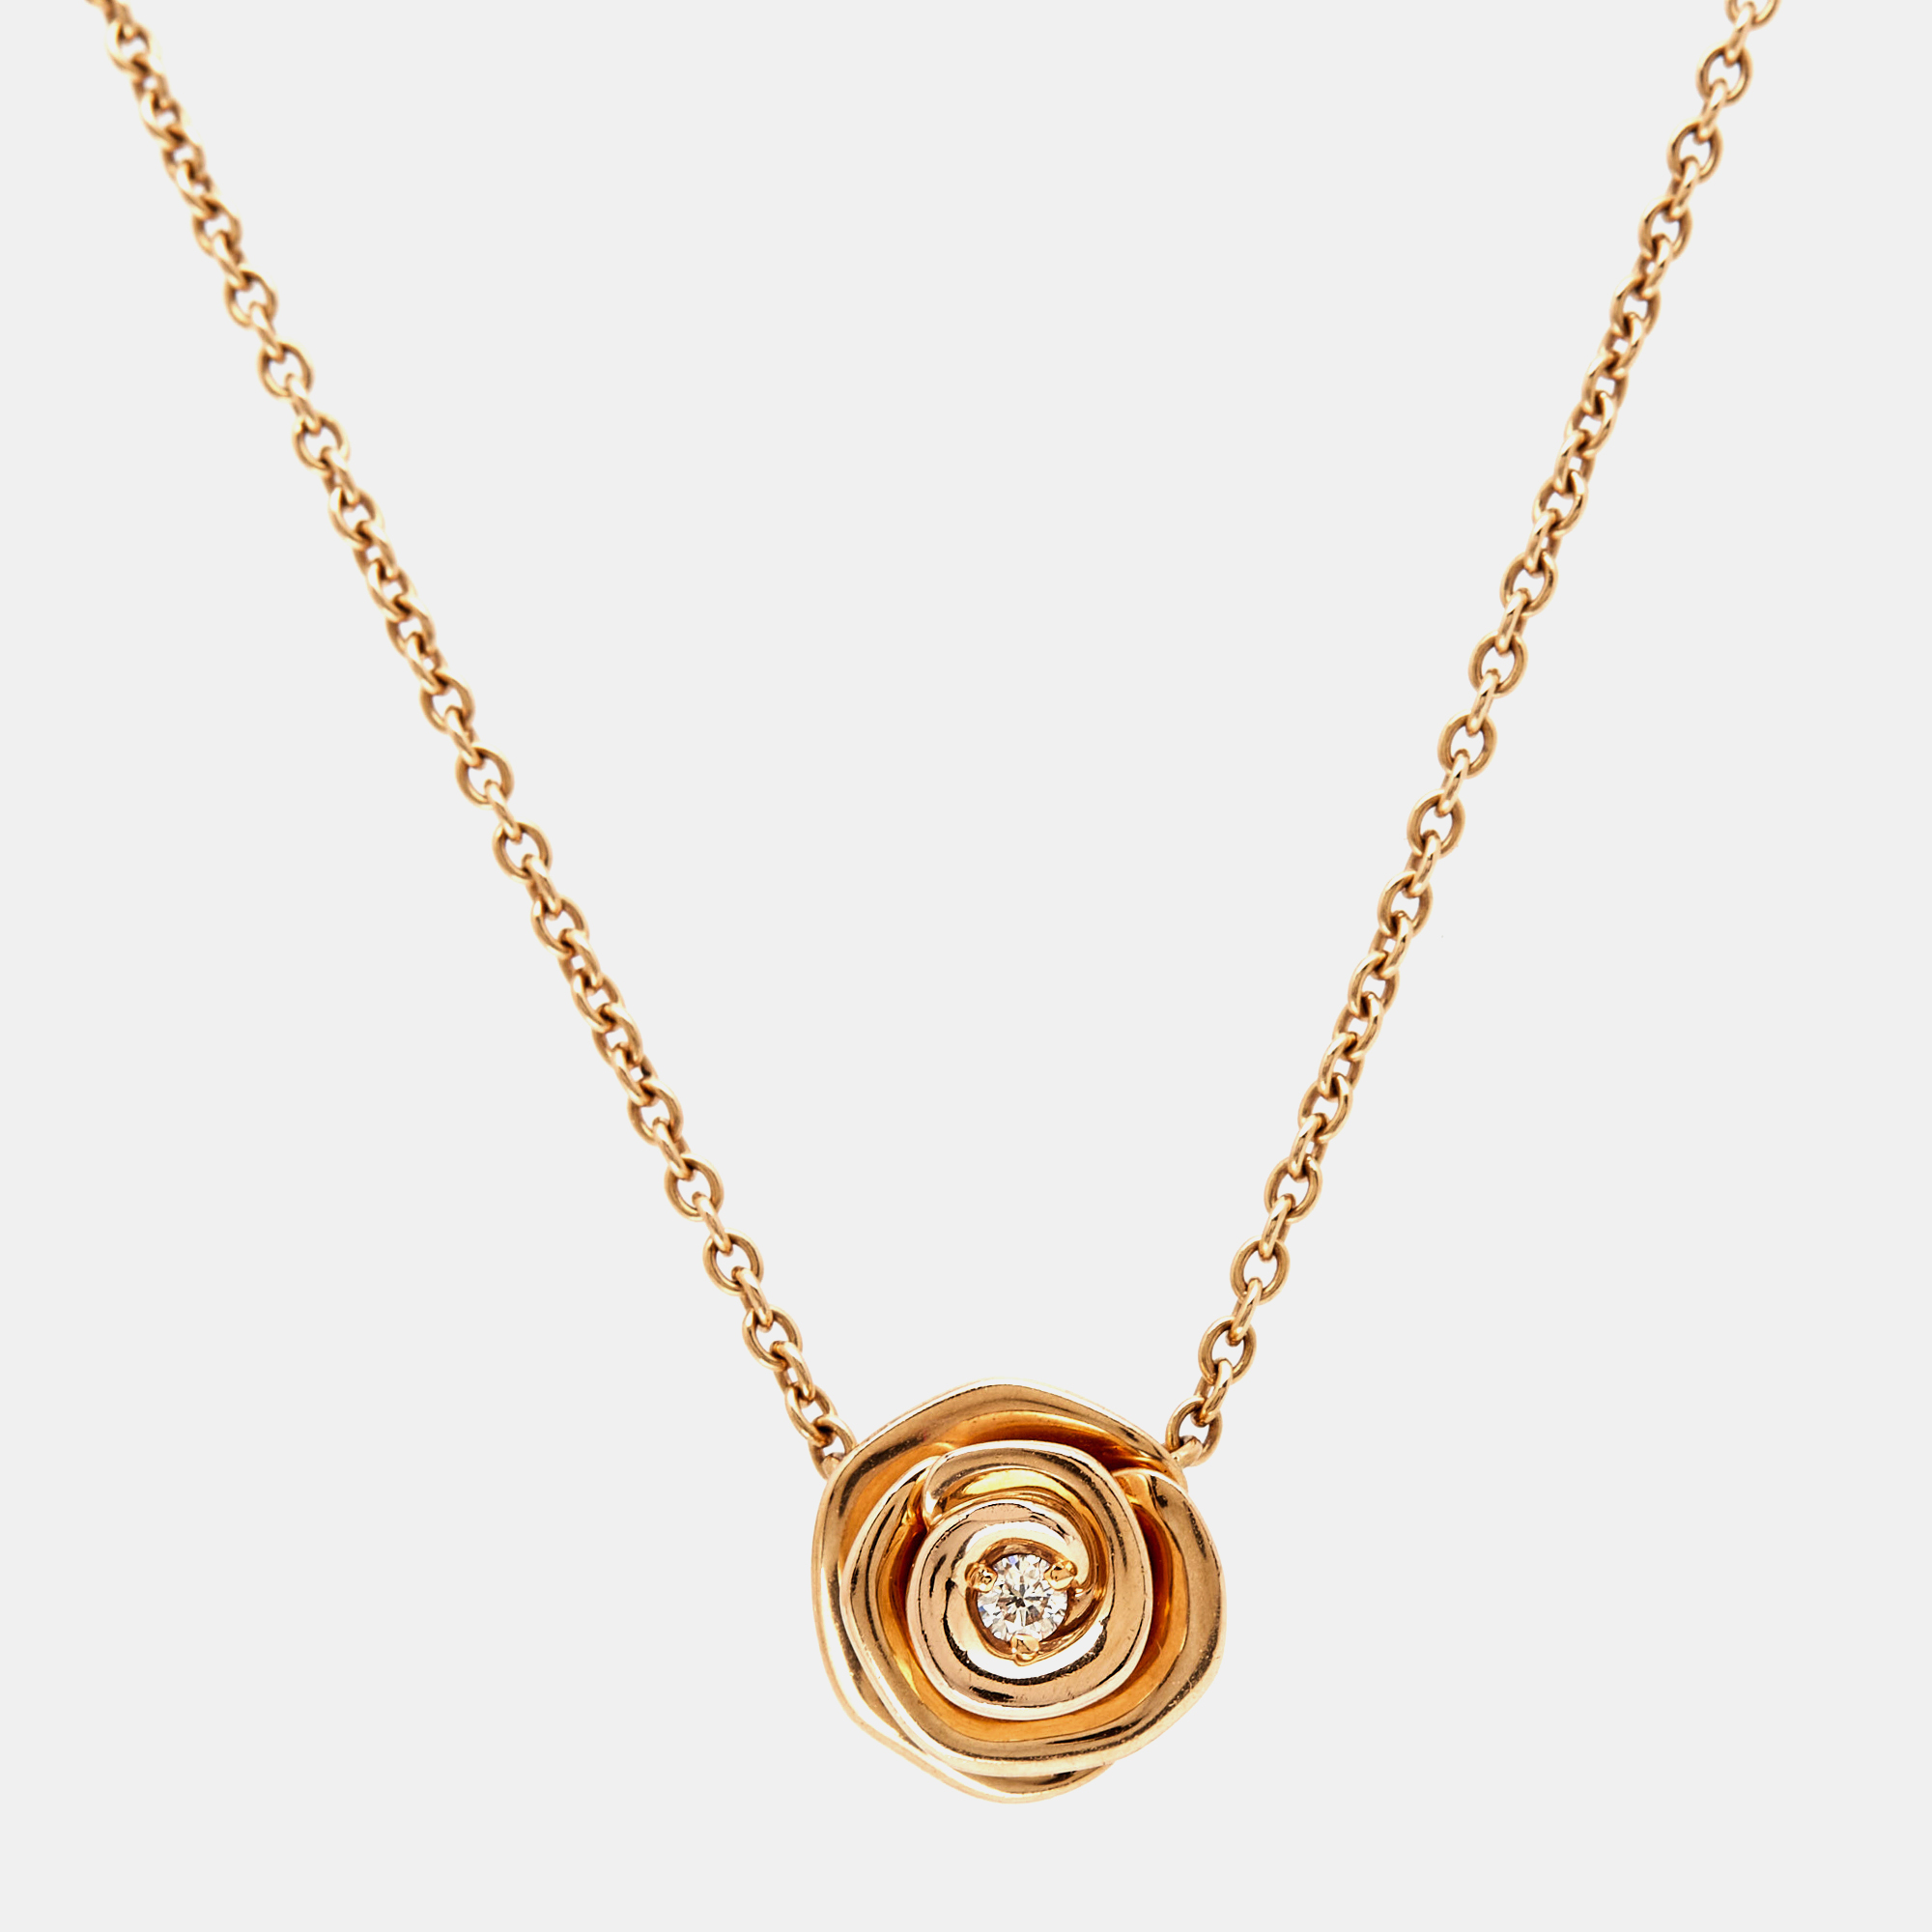 Dior large rose couture diamond 18k rose gold necklace